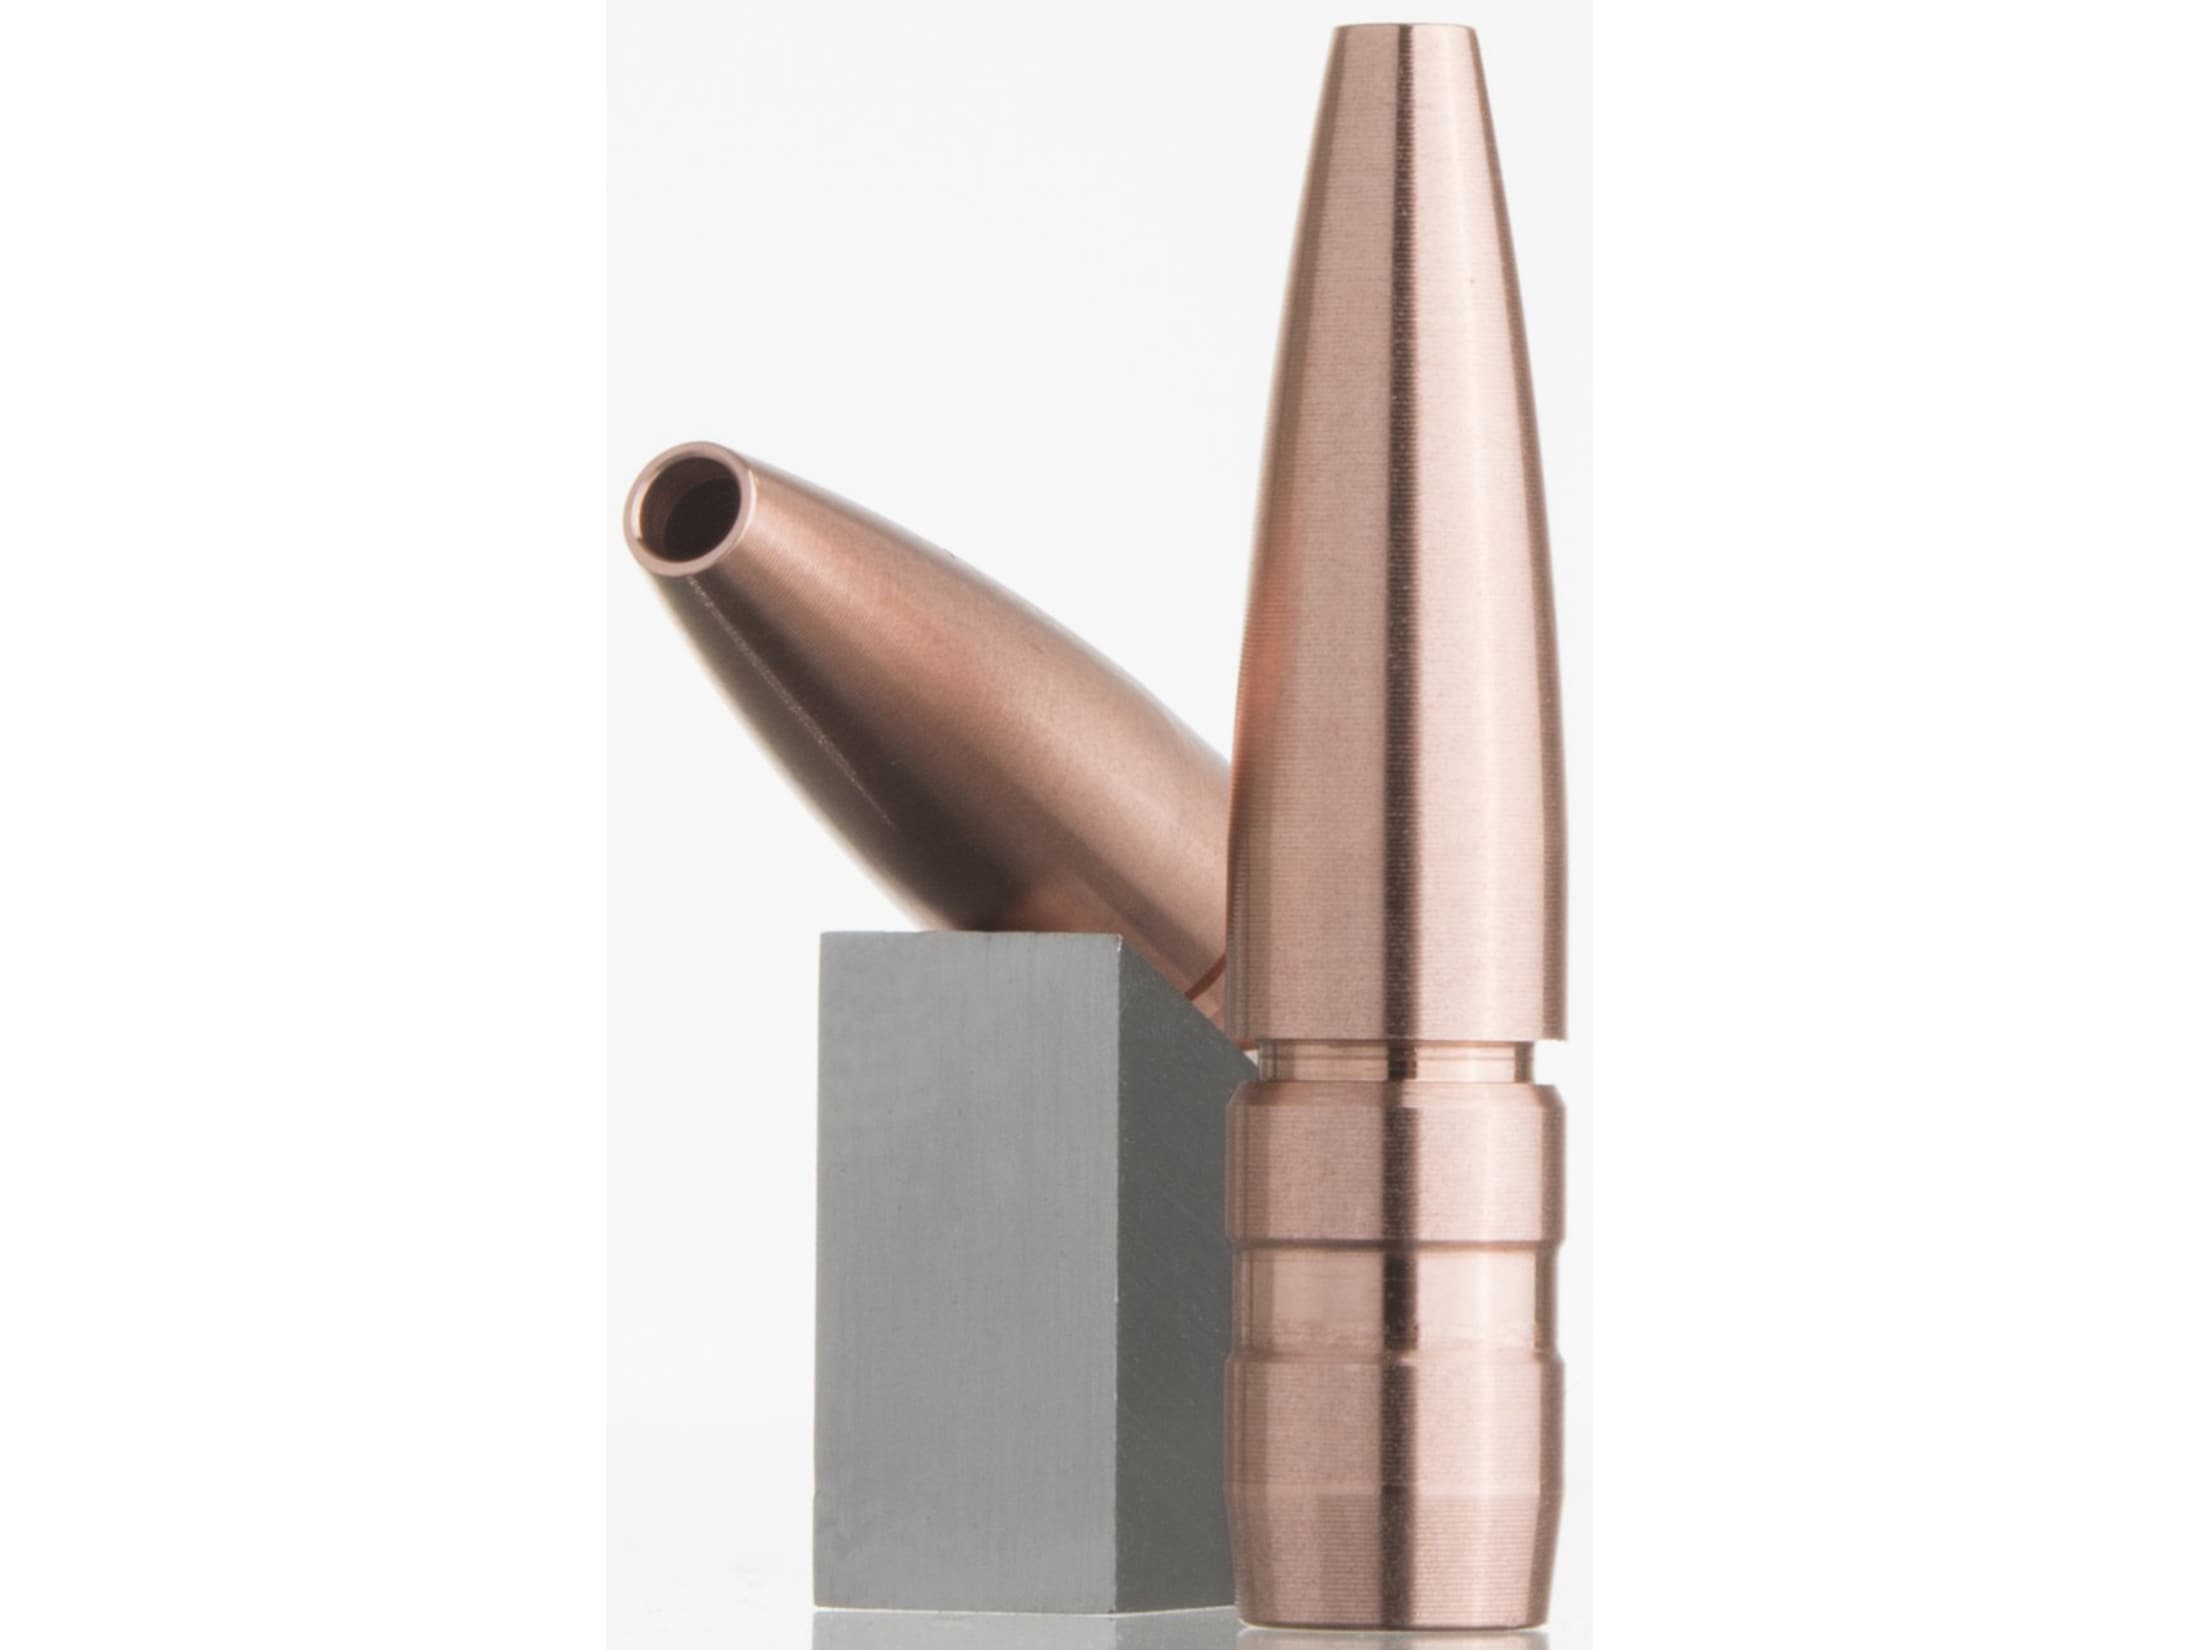 Lehigh Defense Controlled Chaos Bullets 243 Caliber, 6mm (243 Diameter) 85 Grain Fracturing Copper Hollow Point Boat Tail Lead-Free